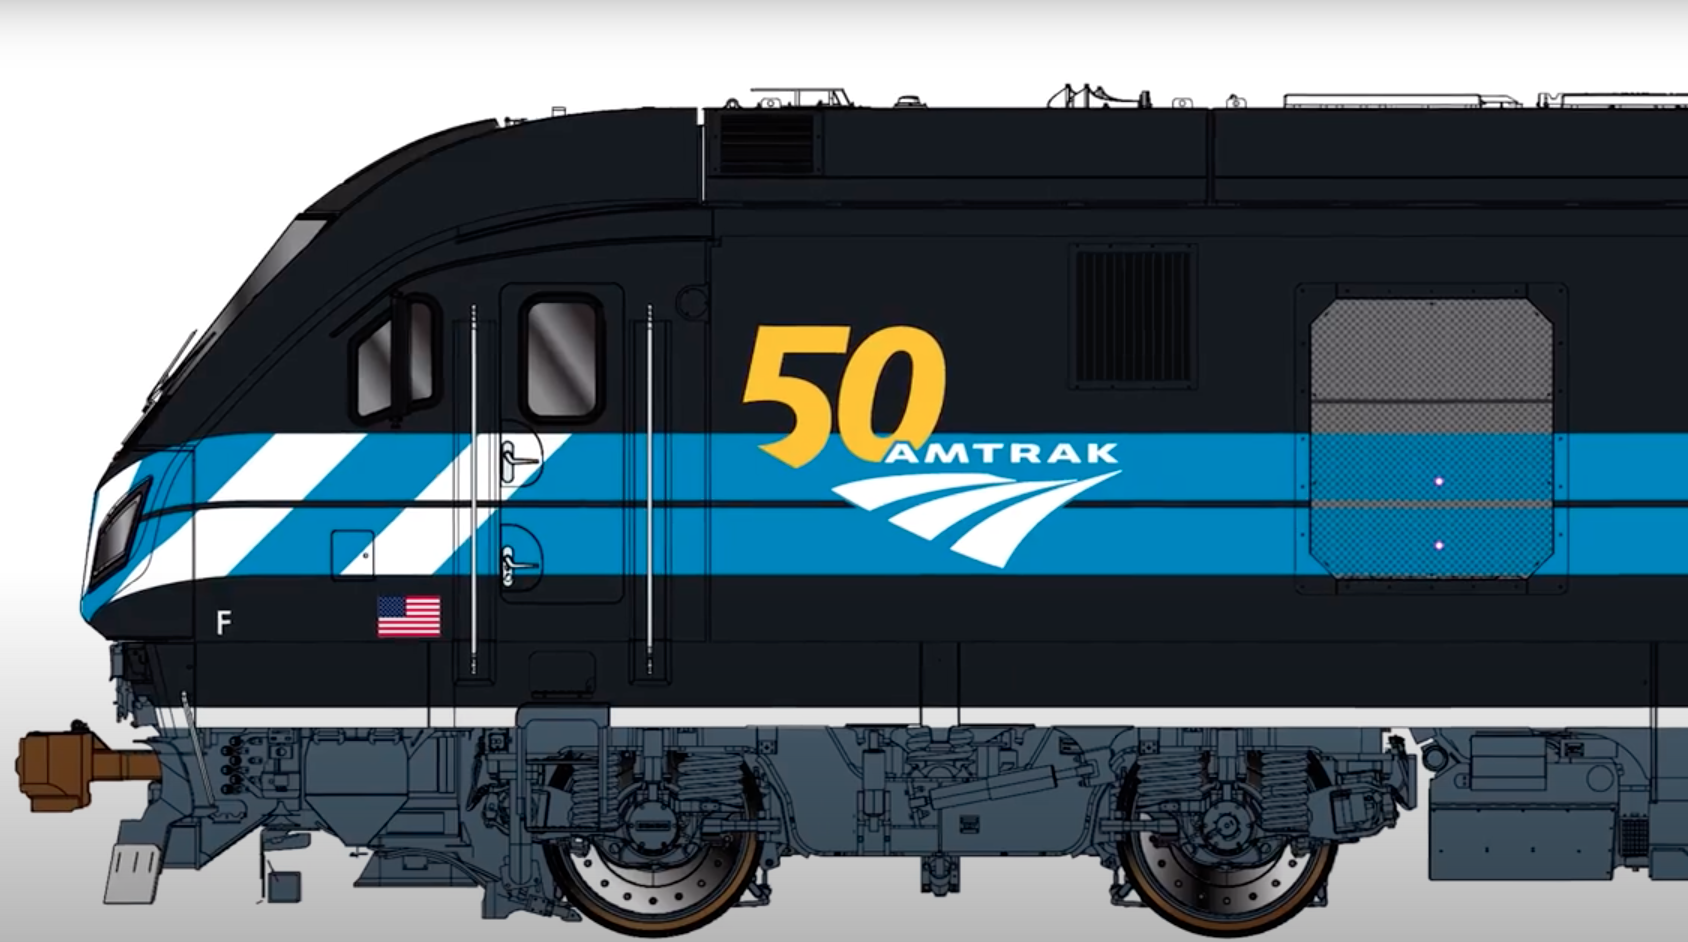 Side-view front portion of an illustration of an Amtrak locomotive in a new, blue paint scheme.